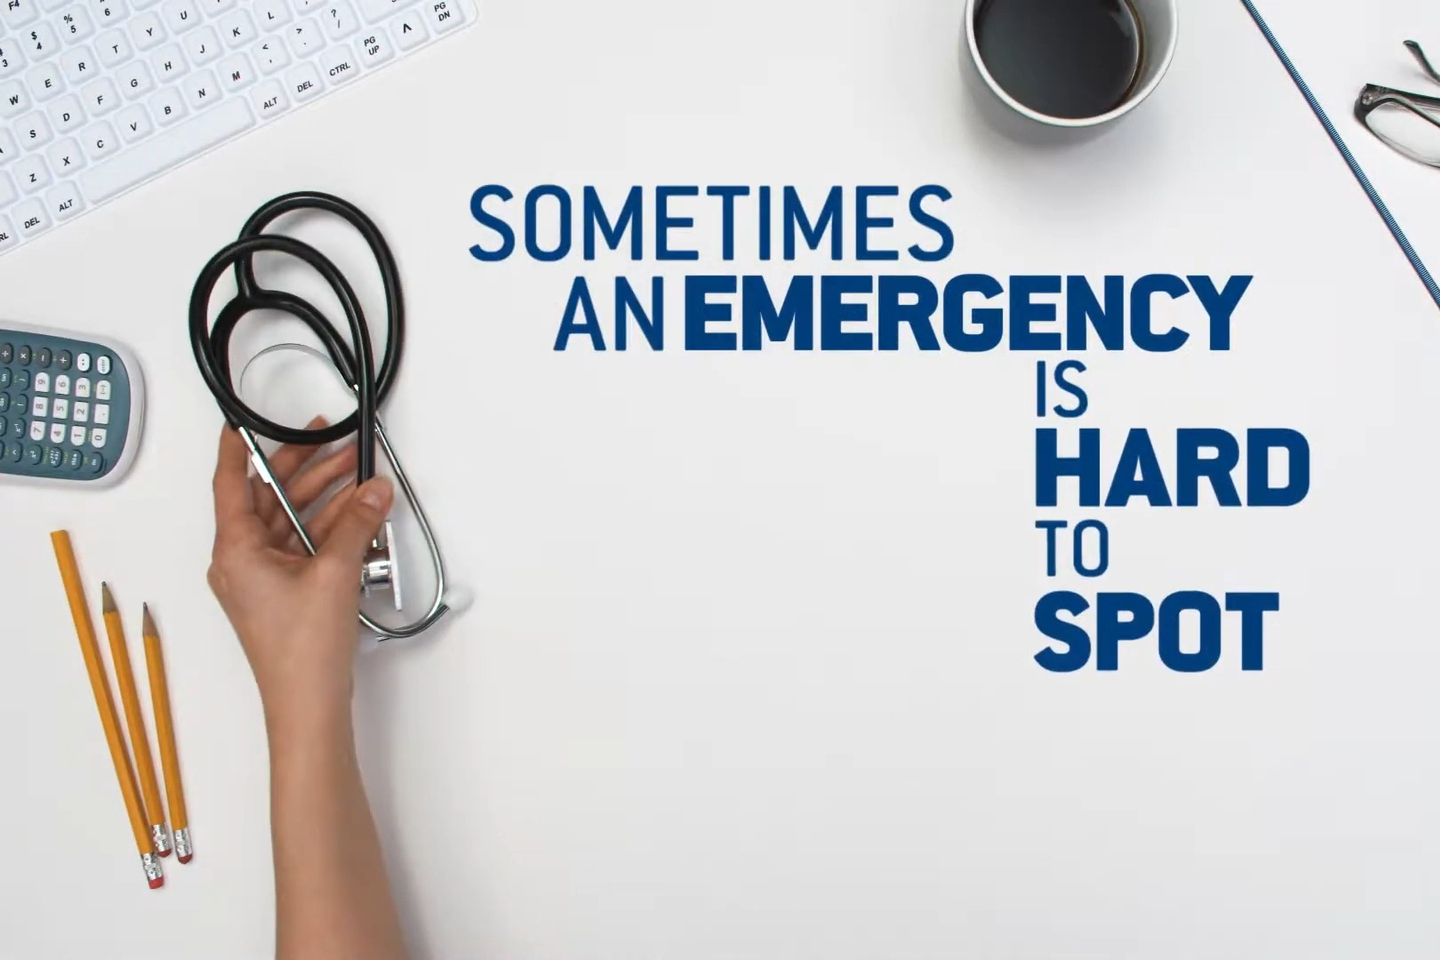 A person's hand reaches across a work desk holding a stethoscope, along with the text, "Sometimes an emergency is hard to spot."